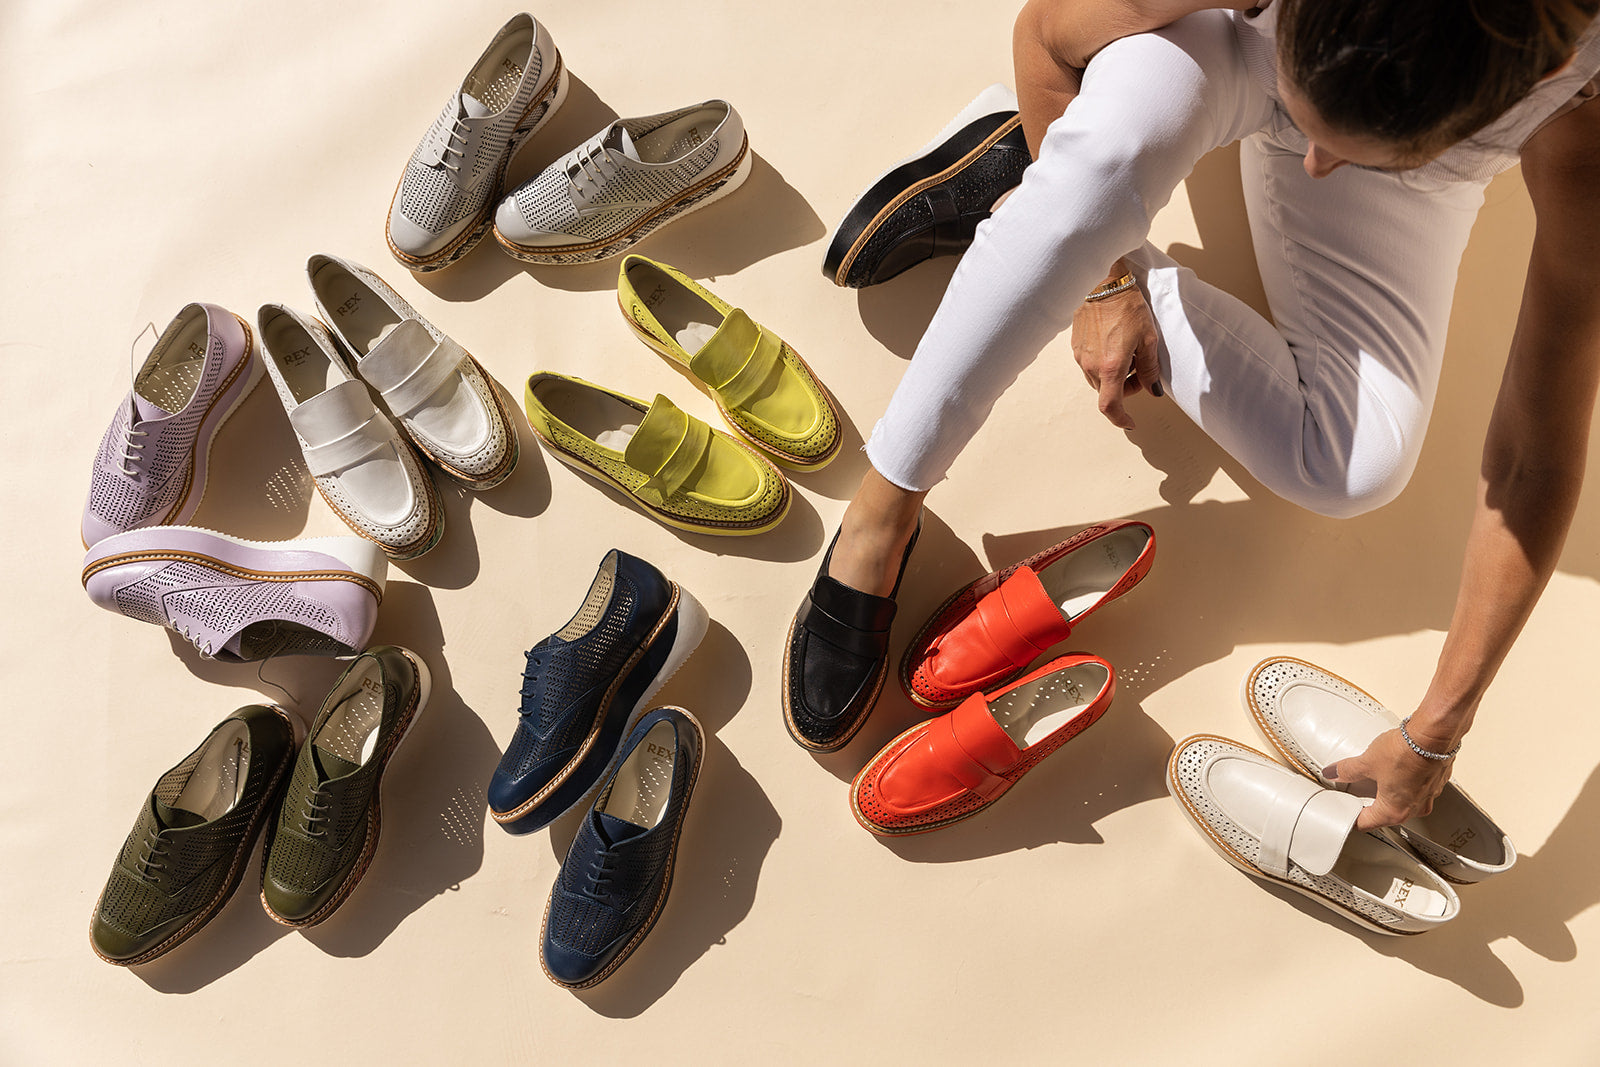 Assortment of Rex Shoes' luxury loafers for women in various colors, including classic white, vibrant red, and chic metallics, displayed around a stylish woman dressing up on a sunlit background.